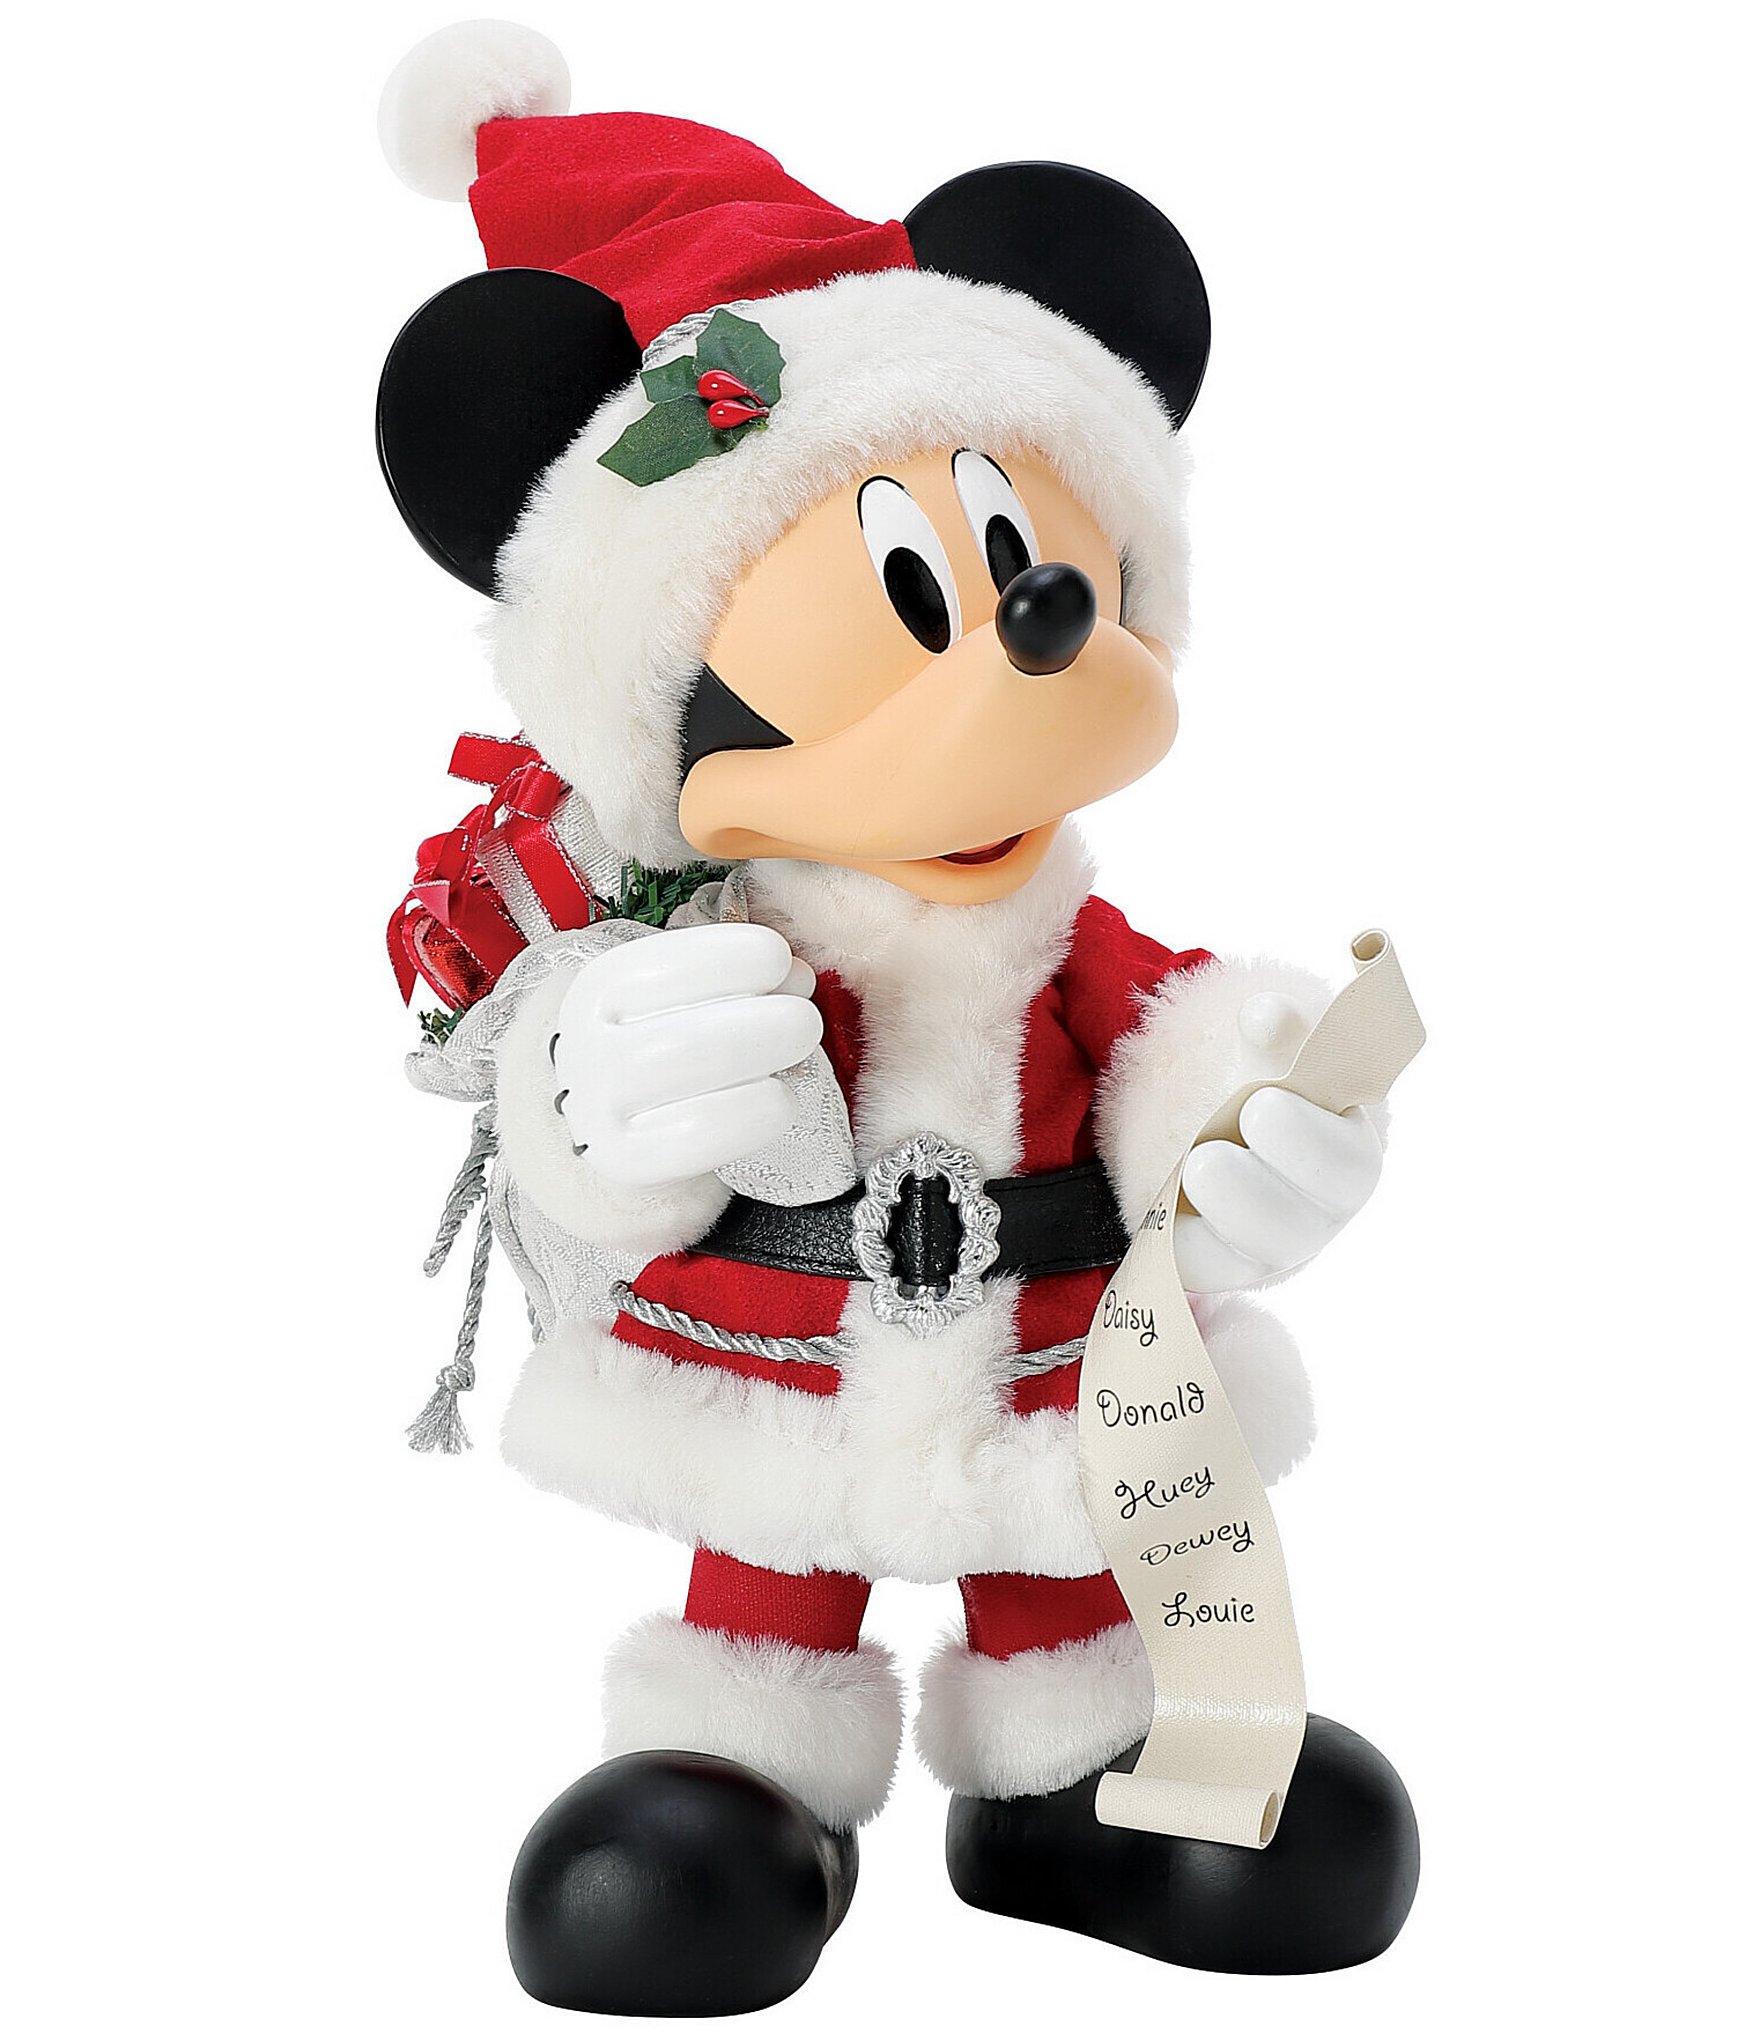 New Disney Mickey Mouse Minnie Mouse Pluto Christmas Rug - household items  - by owner - housewares sale - craigslist